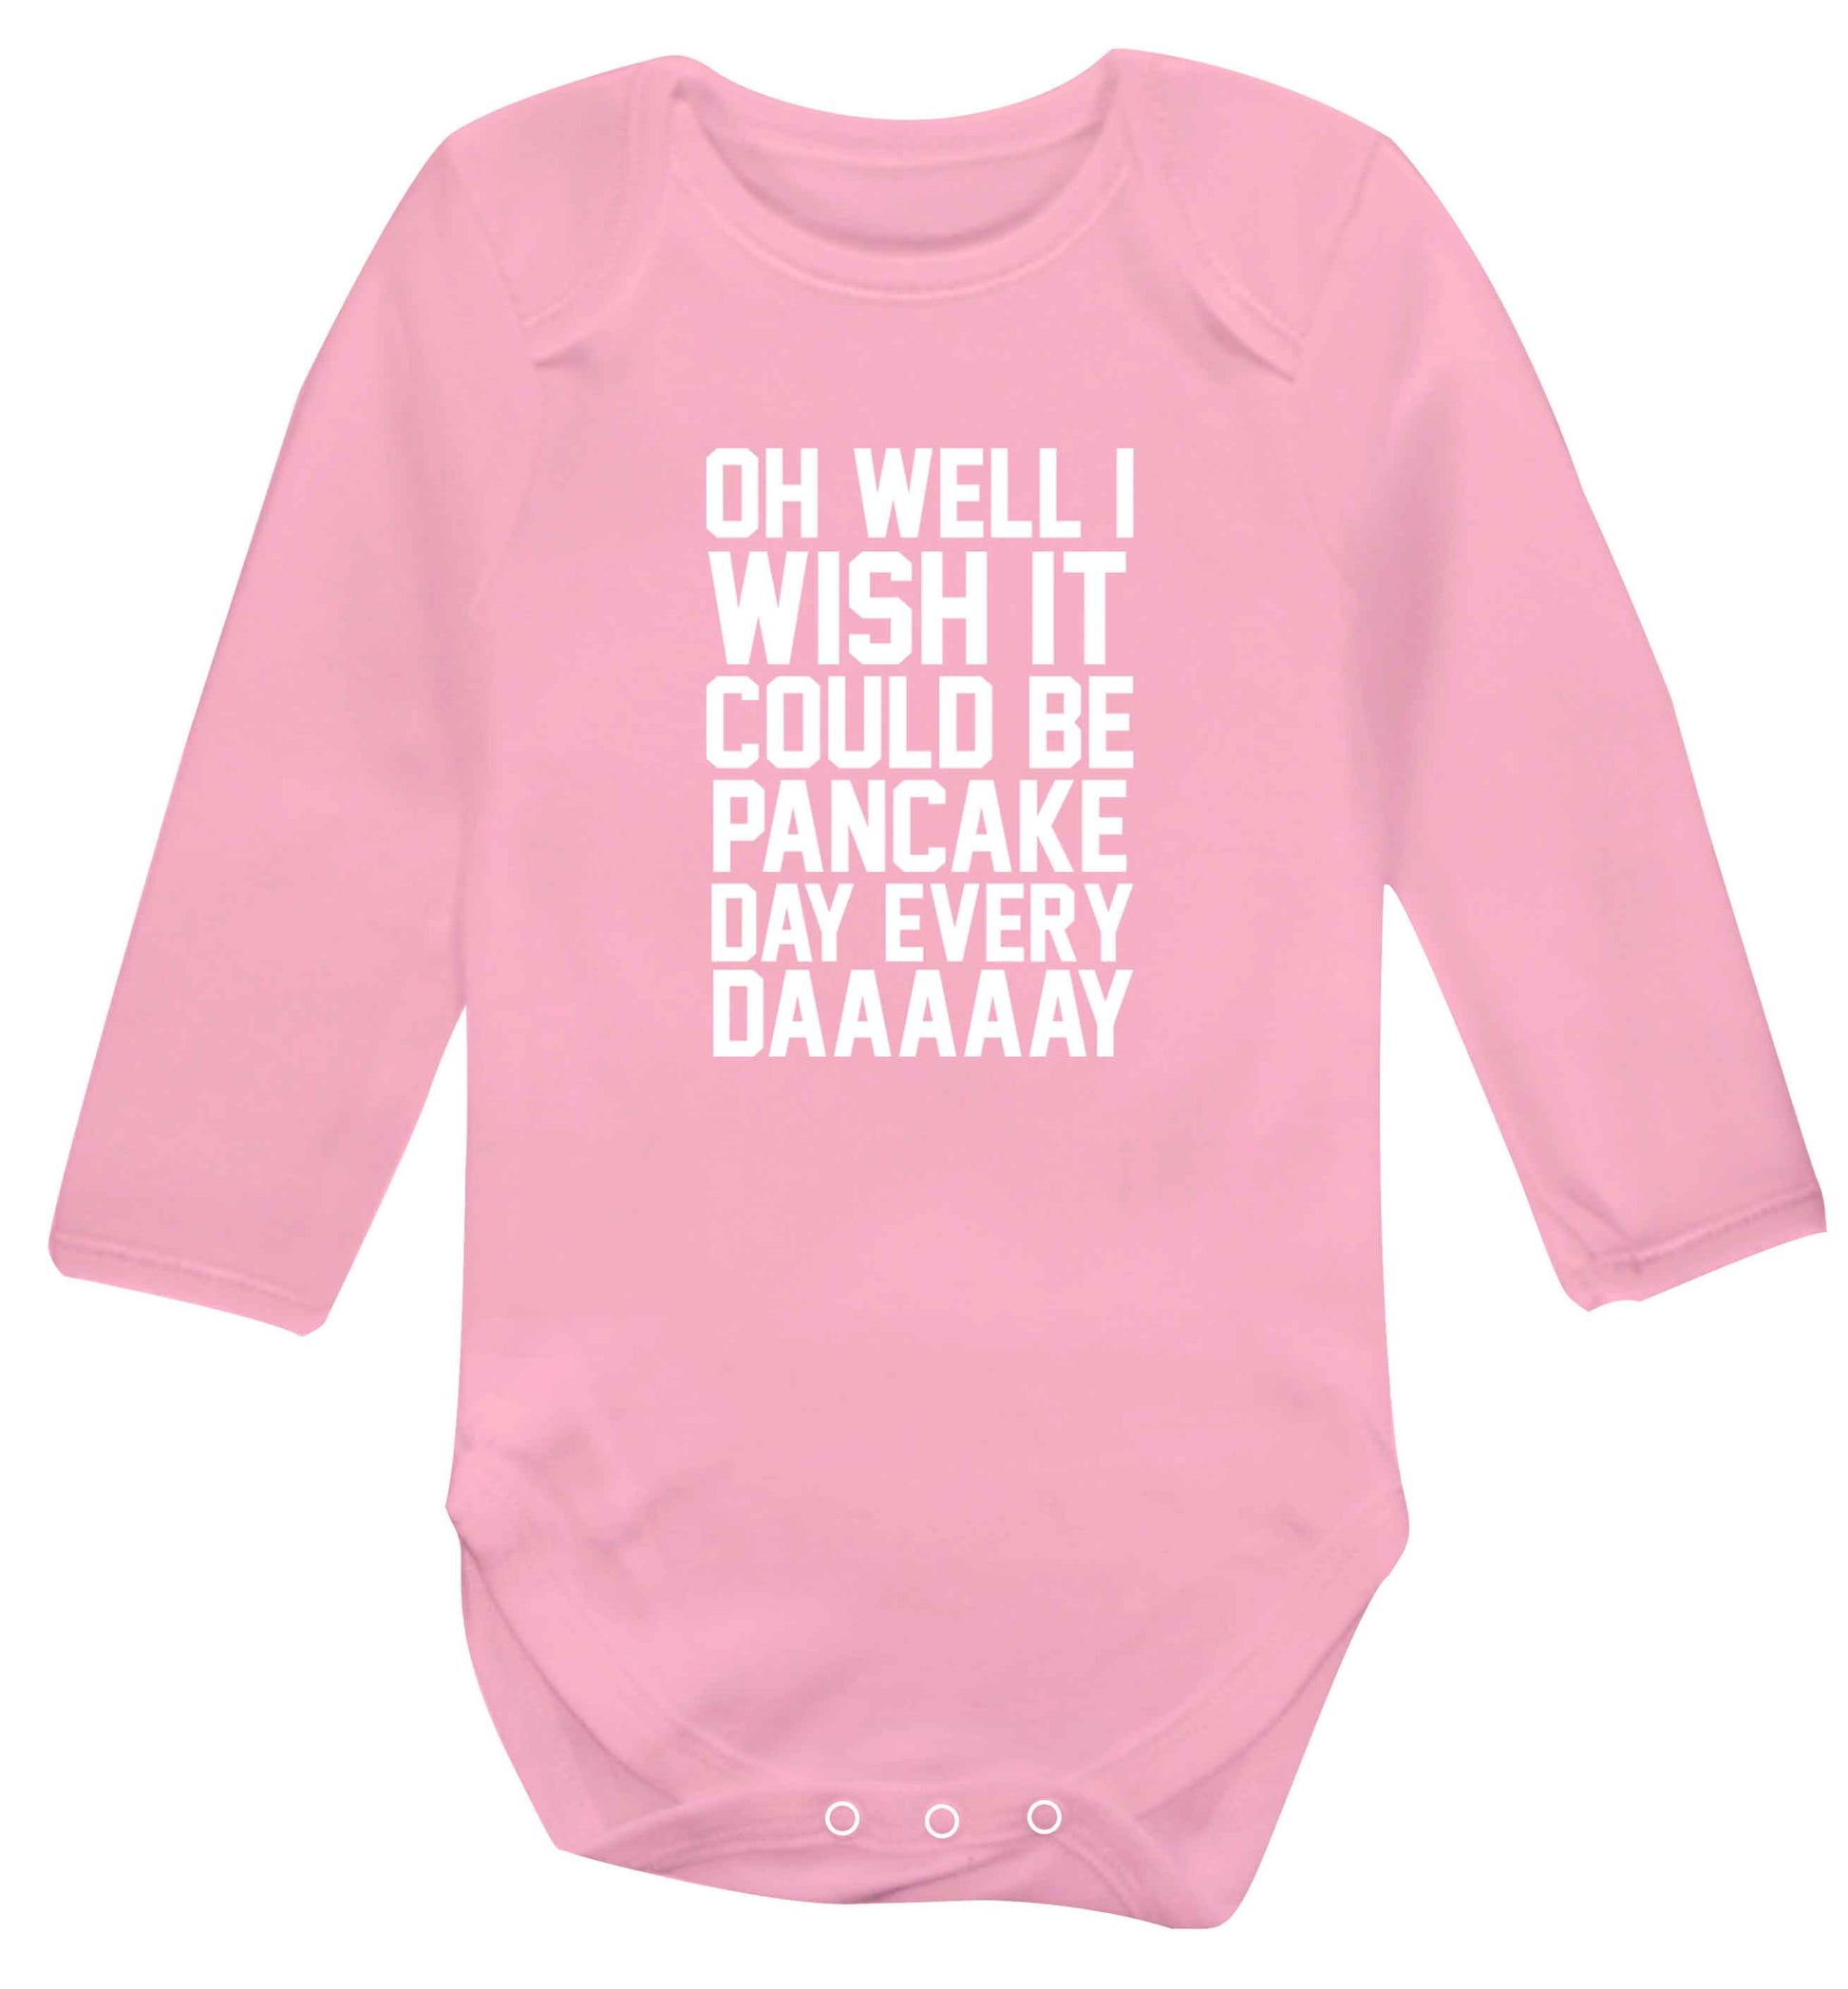 Oh well I wish it could be pancake day every day baby vest long sleeved pale pink 6-12 months